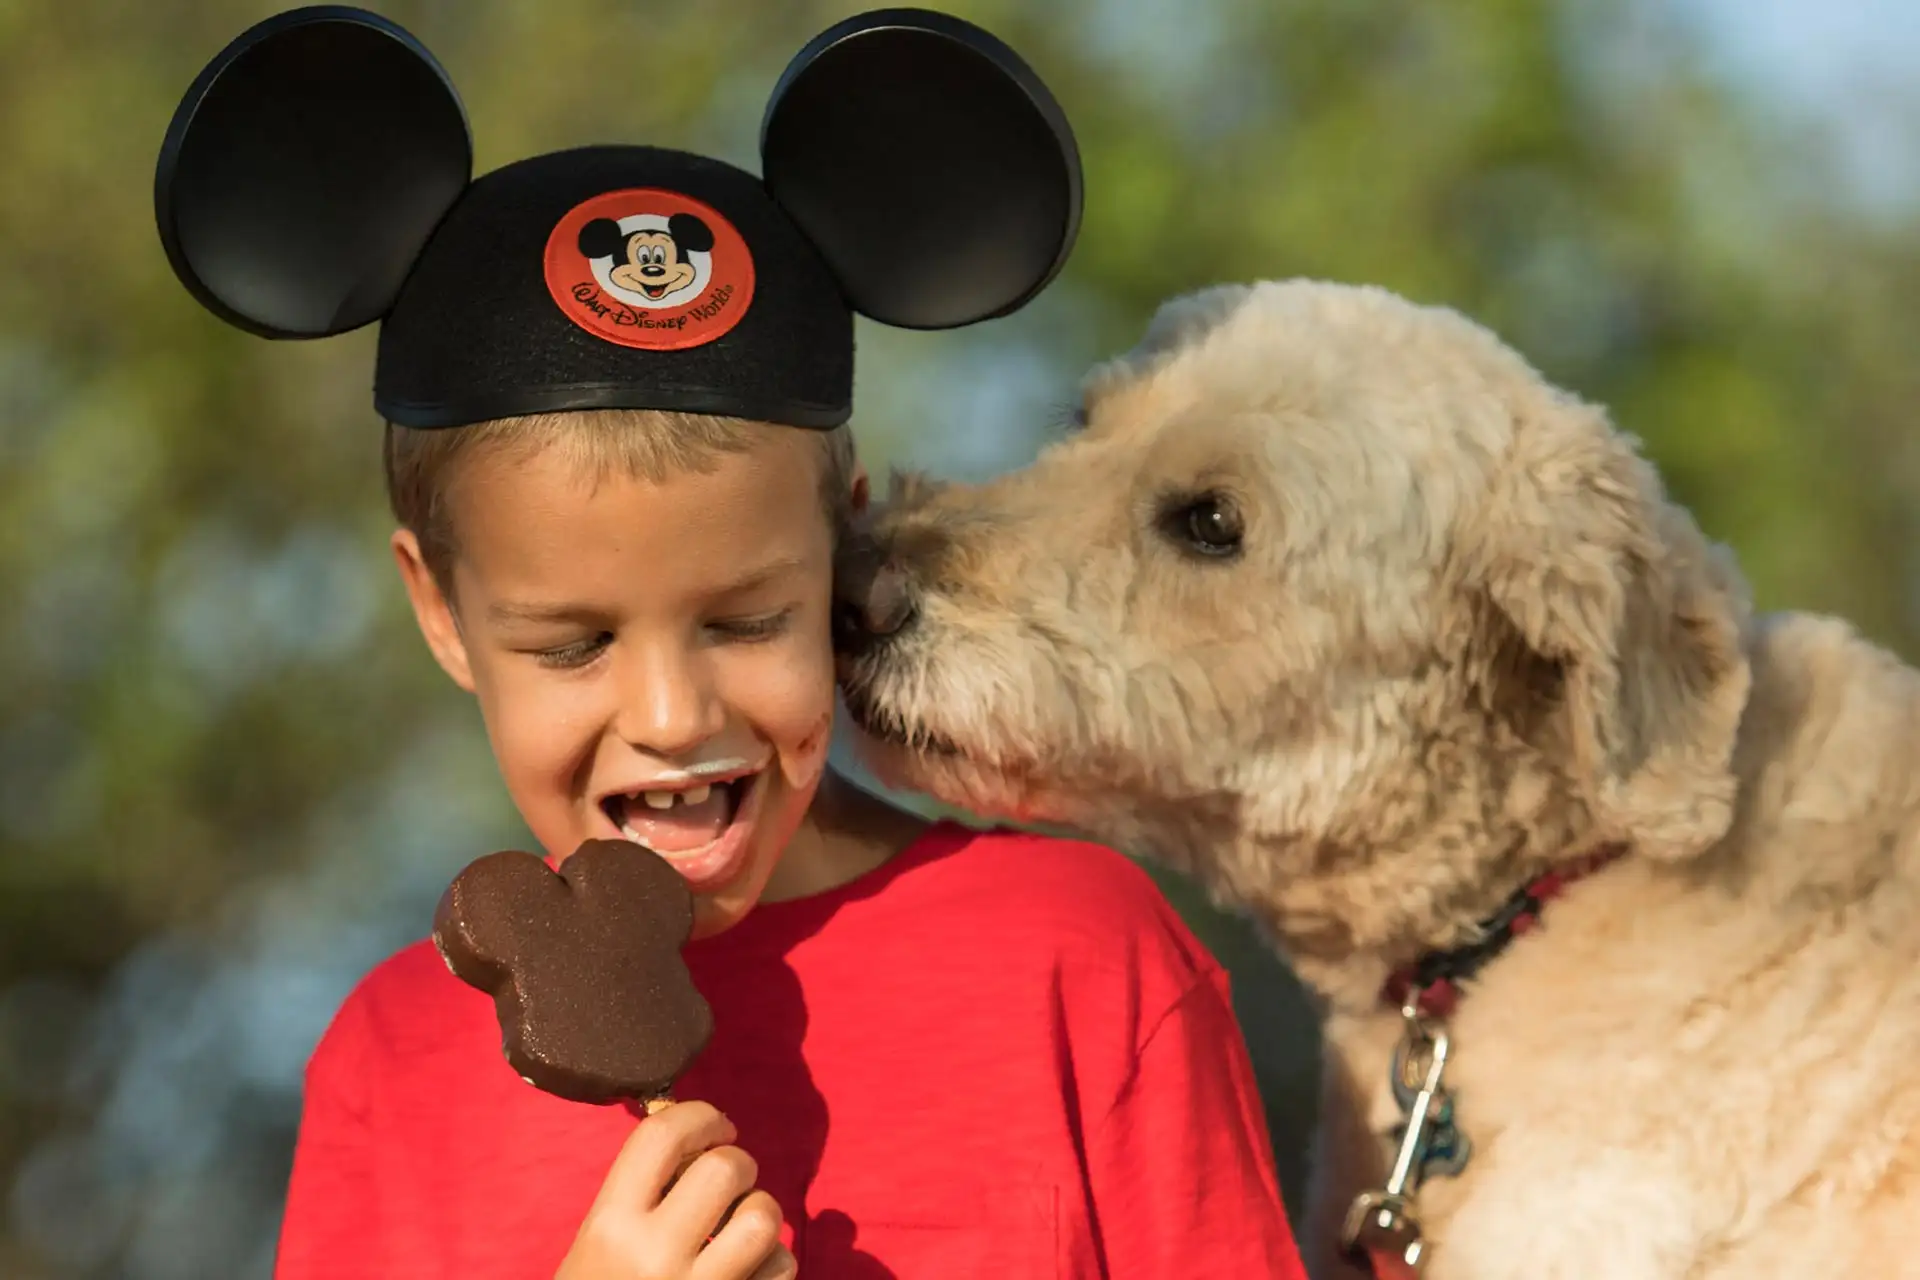 A new dog-friendly policy is coming to select Disney World Resort Hotels in Florida.